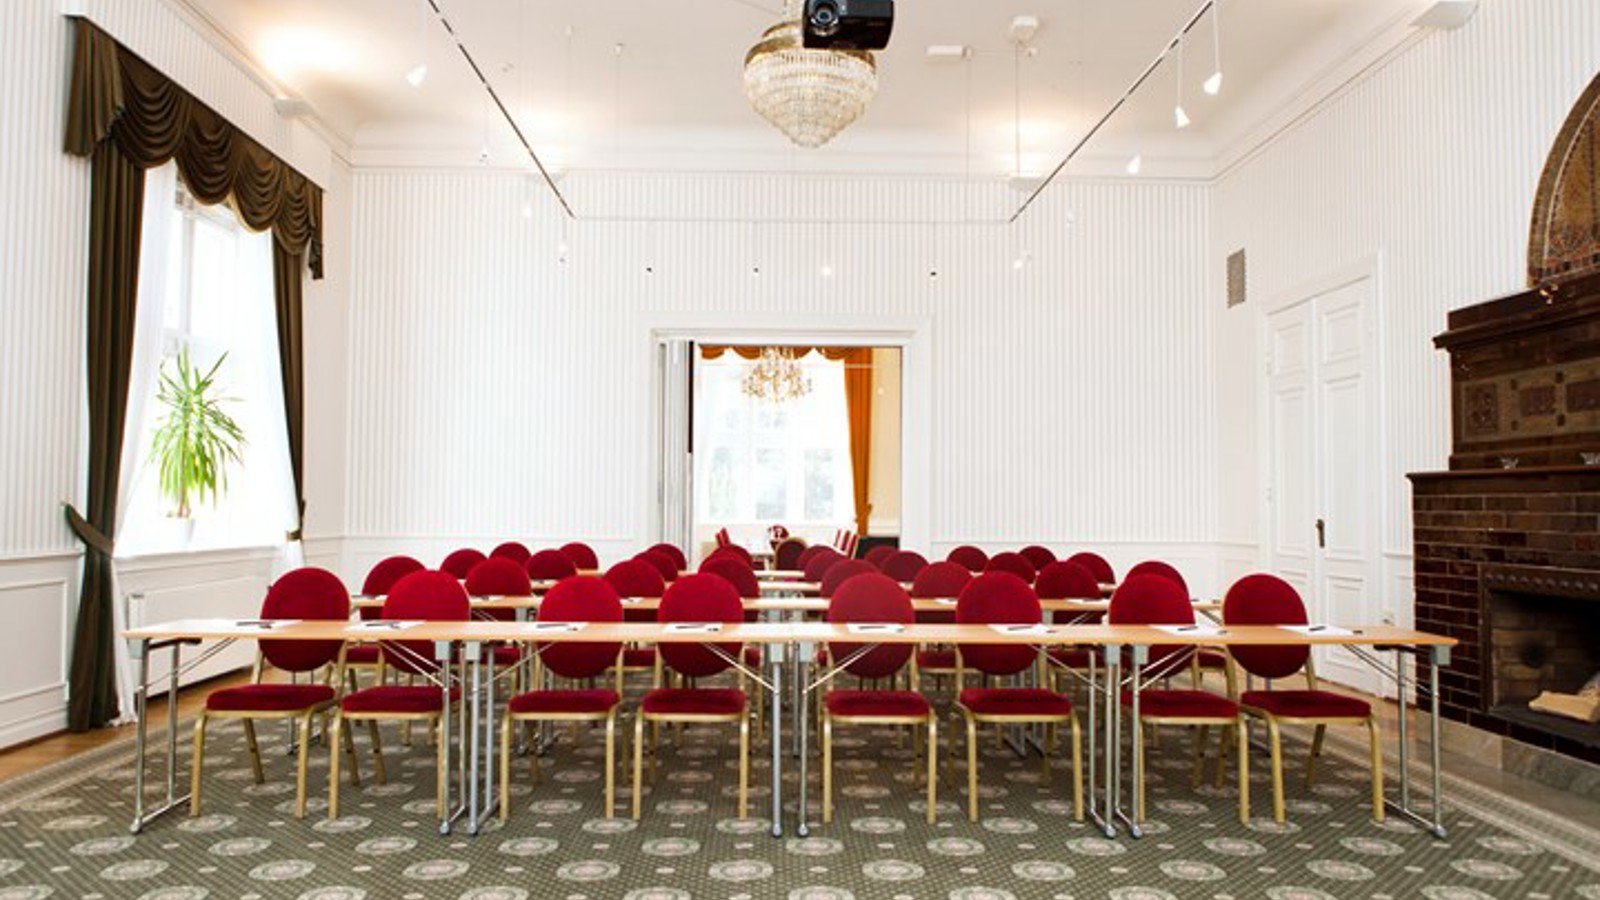 Conference room with school seating, red chairs, white walls and green patterned carpet